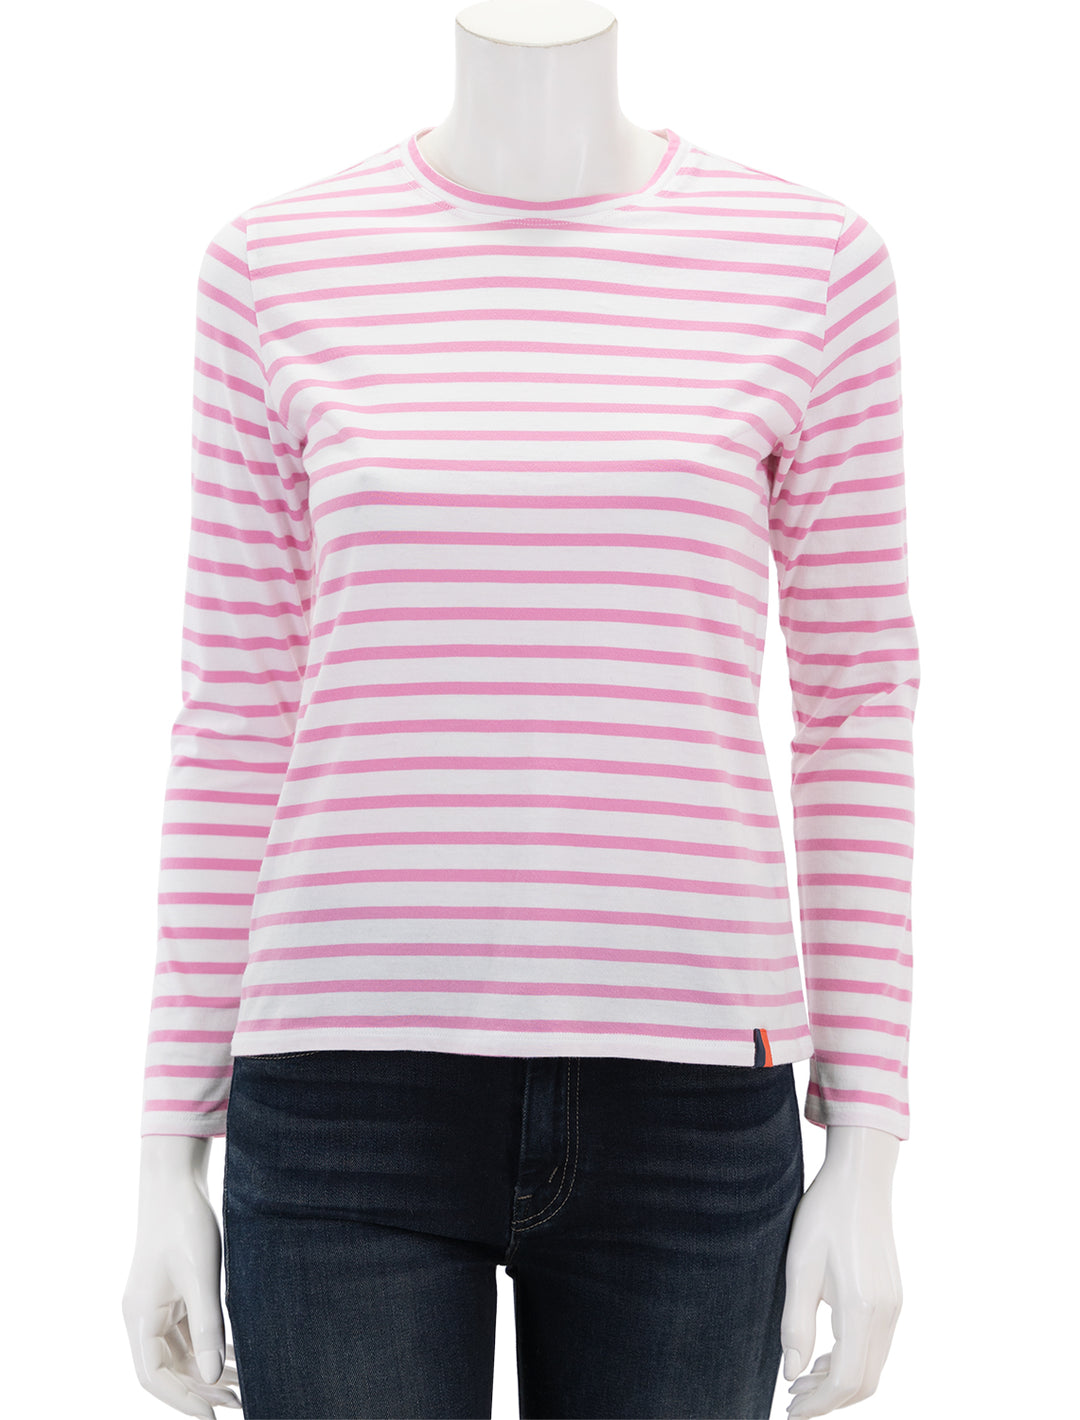 Front view of KULE's the modern long sleeve tee in pink and white stripe.